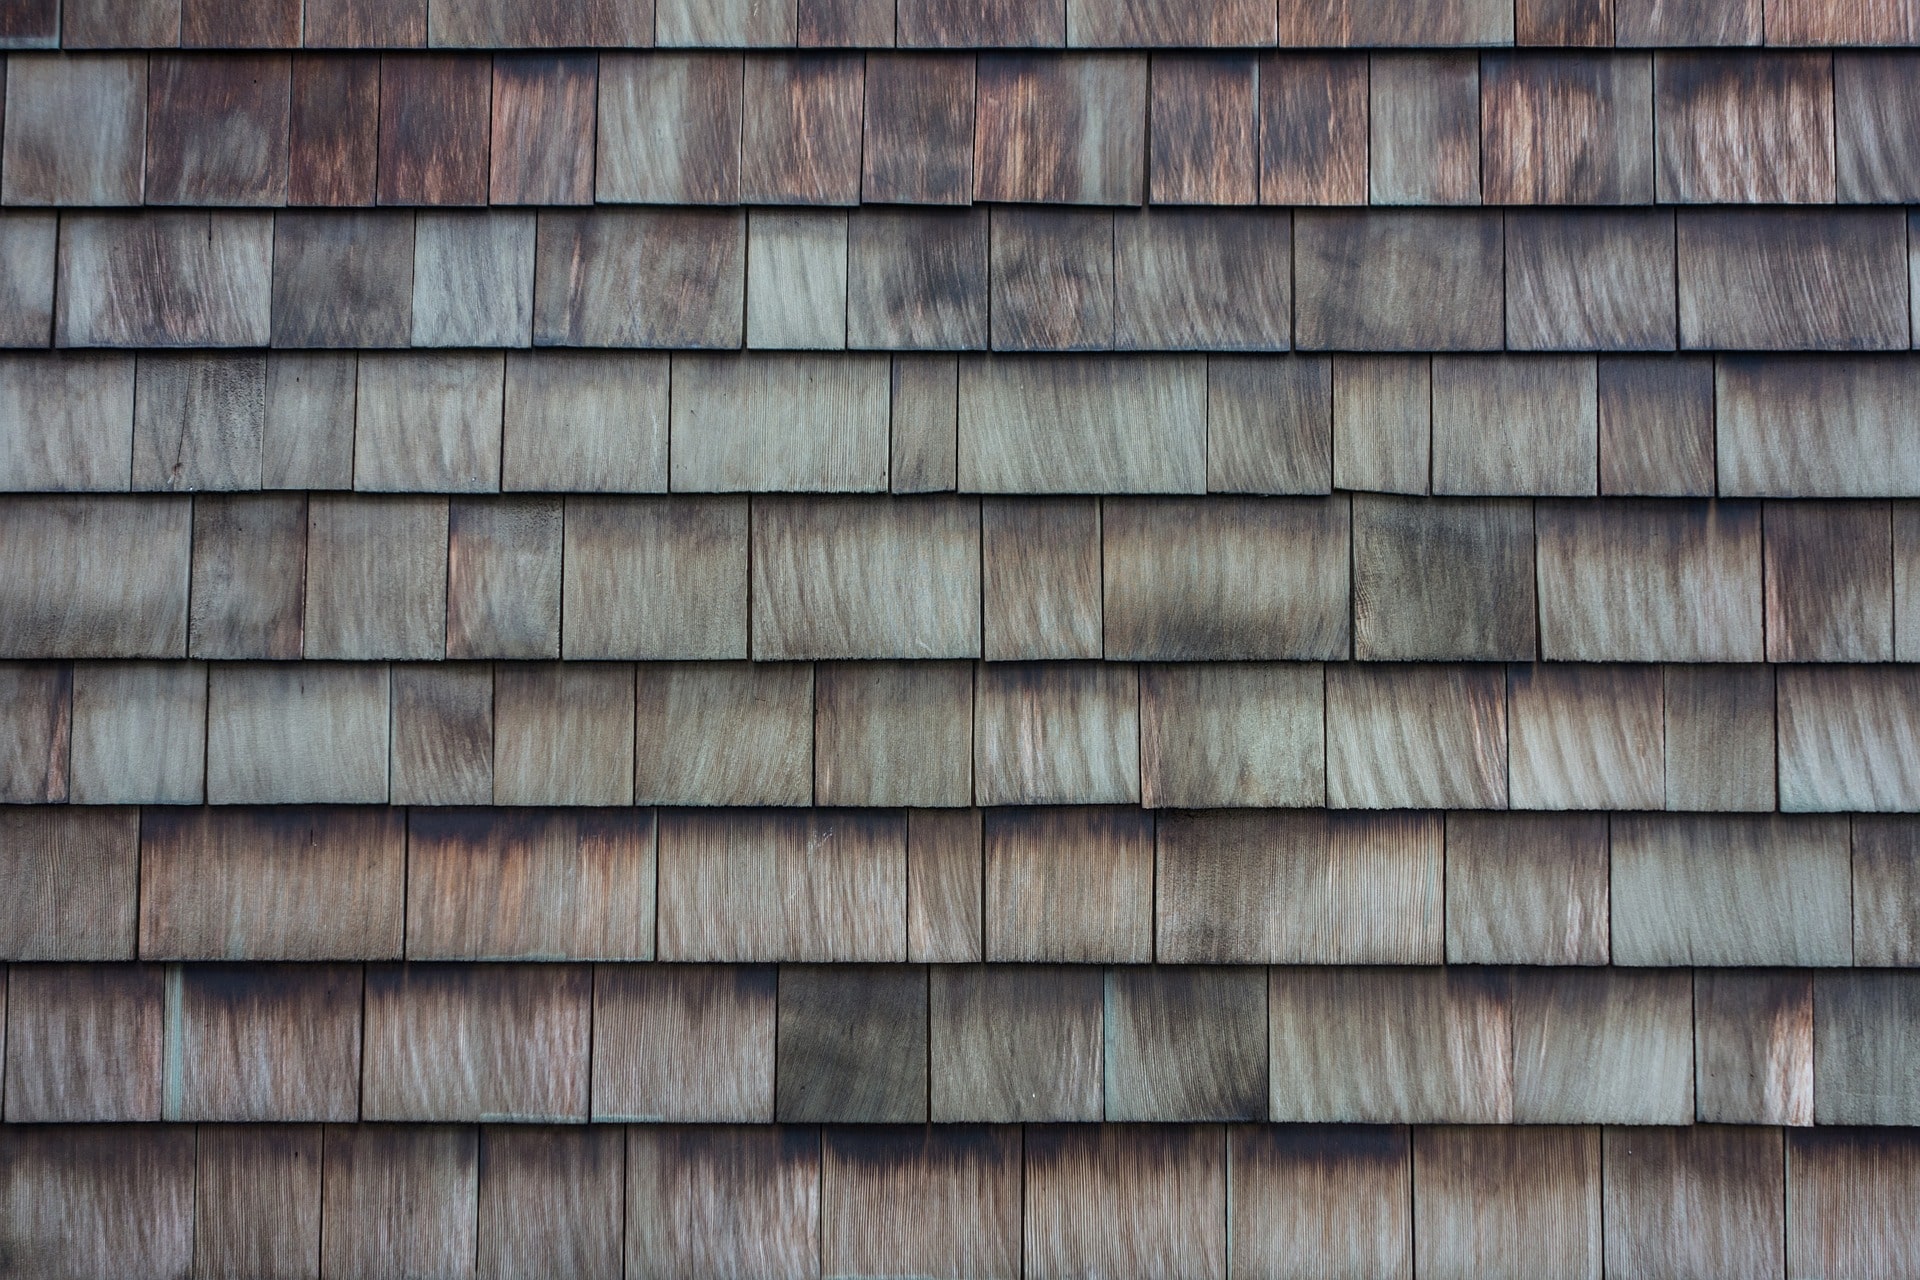 wooden shingles on a roof